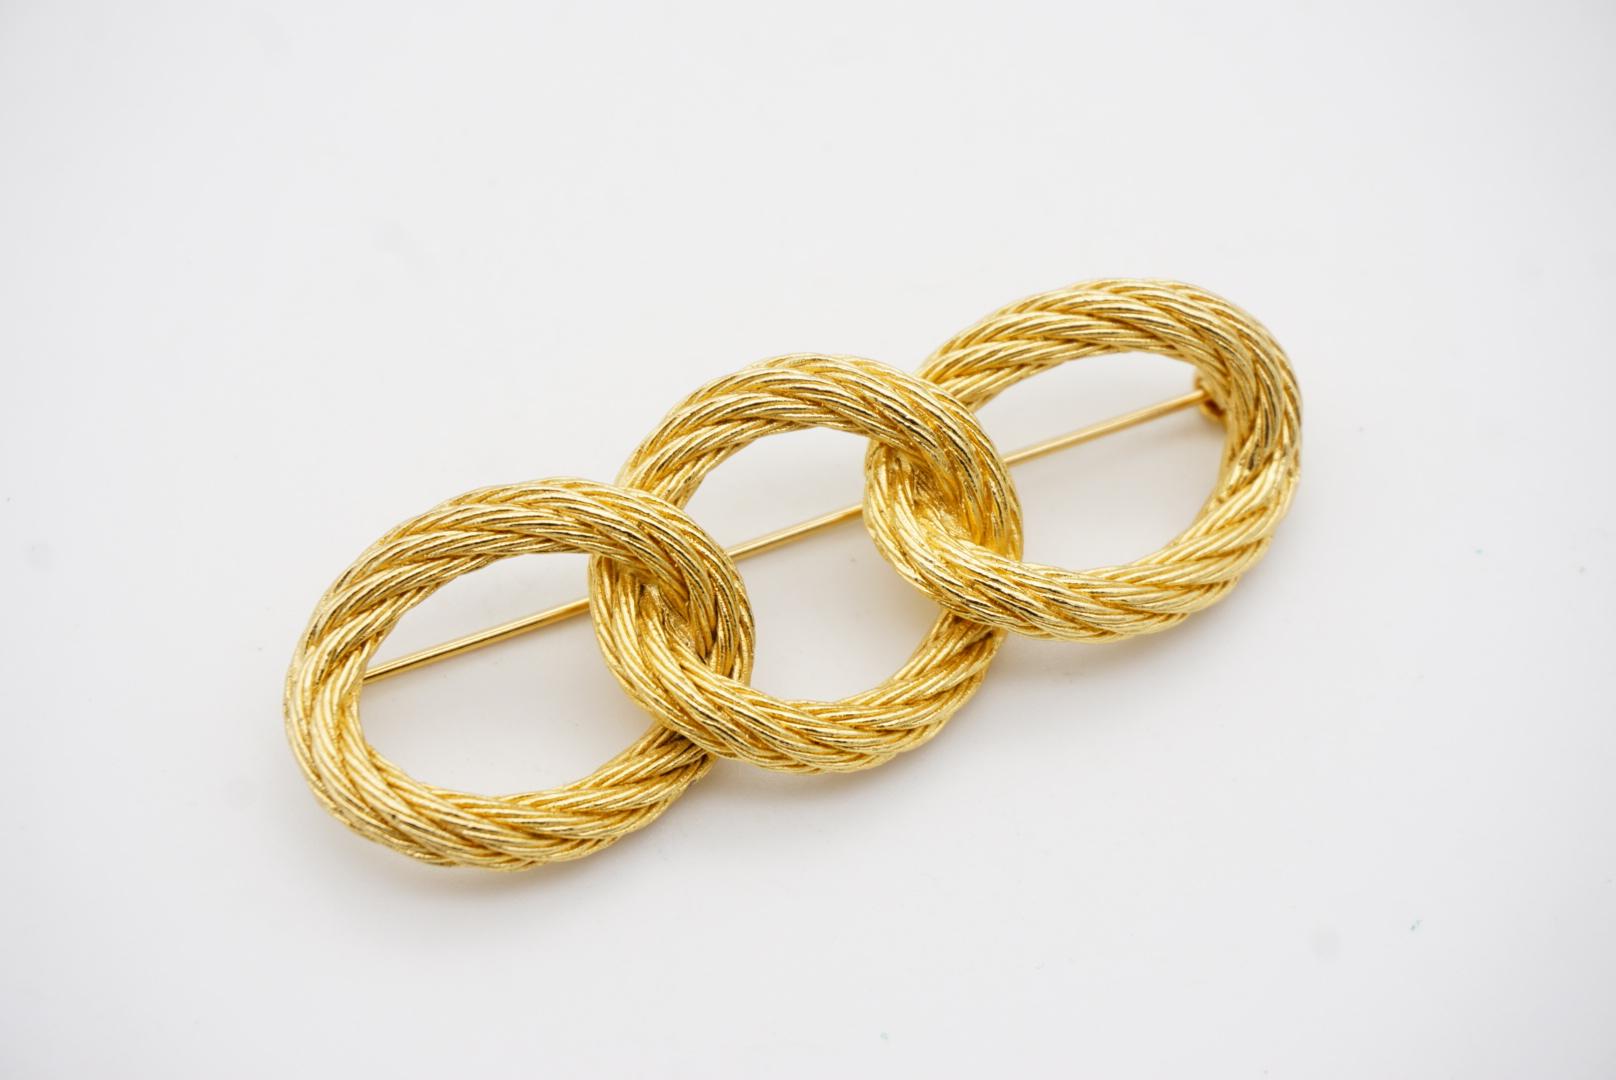 Christian Dior 1980s Vintage Large Trio Oval Interlocked Rope Twist Knot Brooch For Sale 4